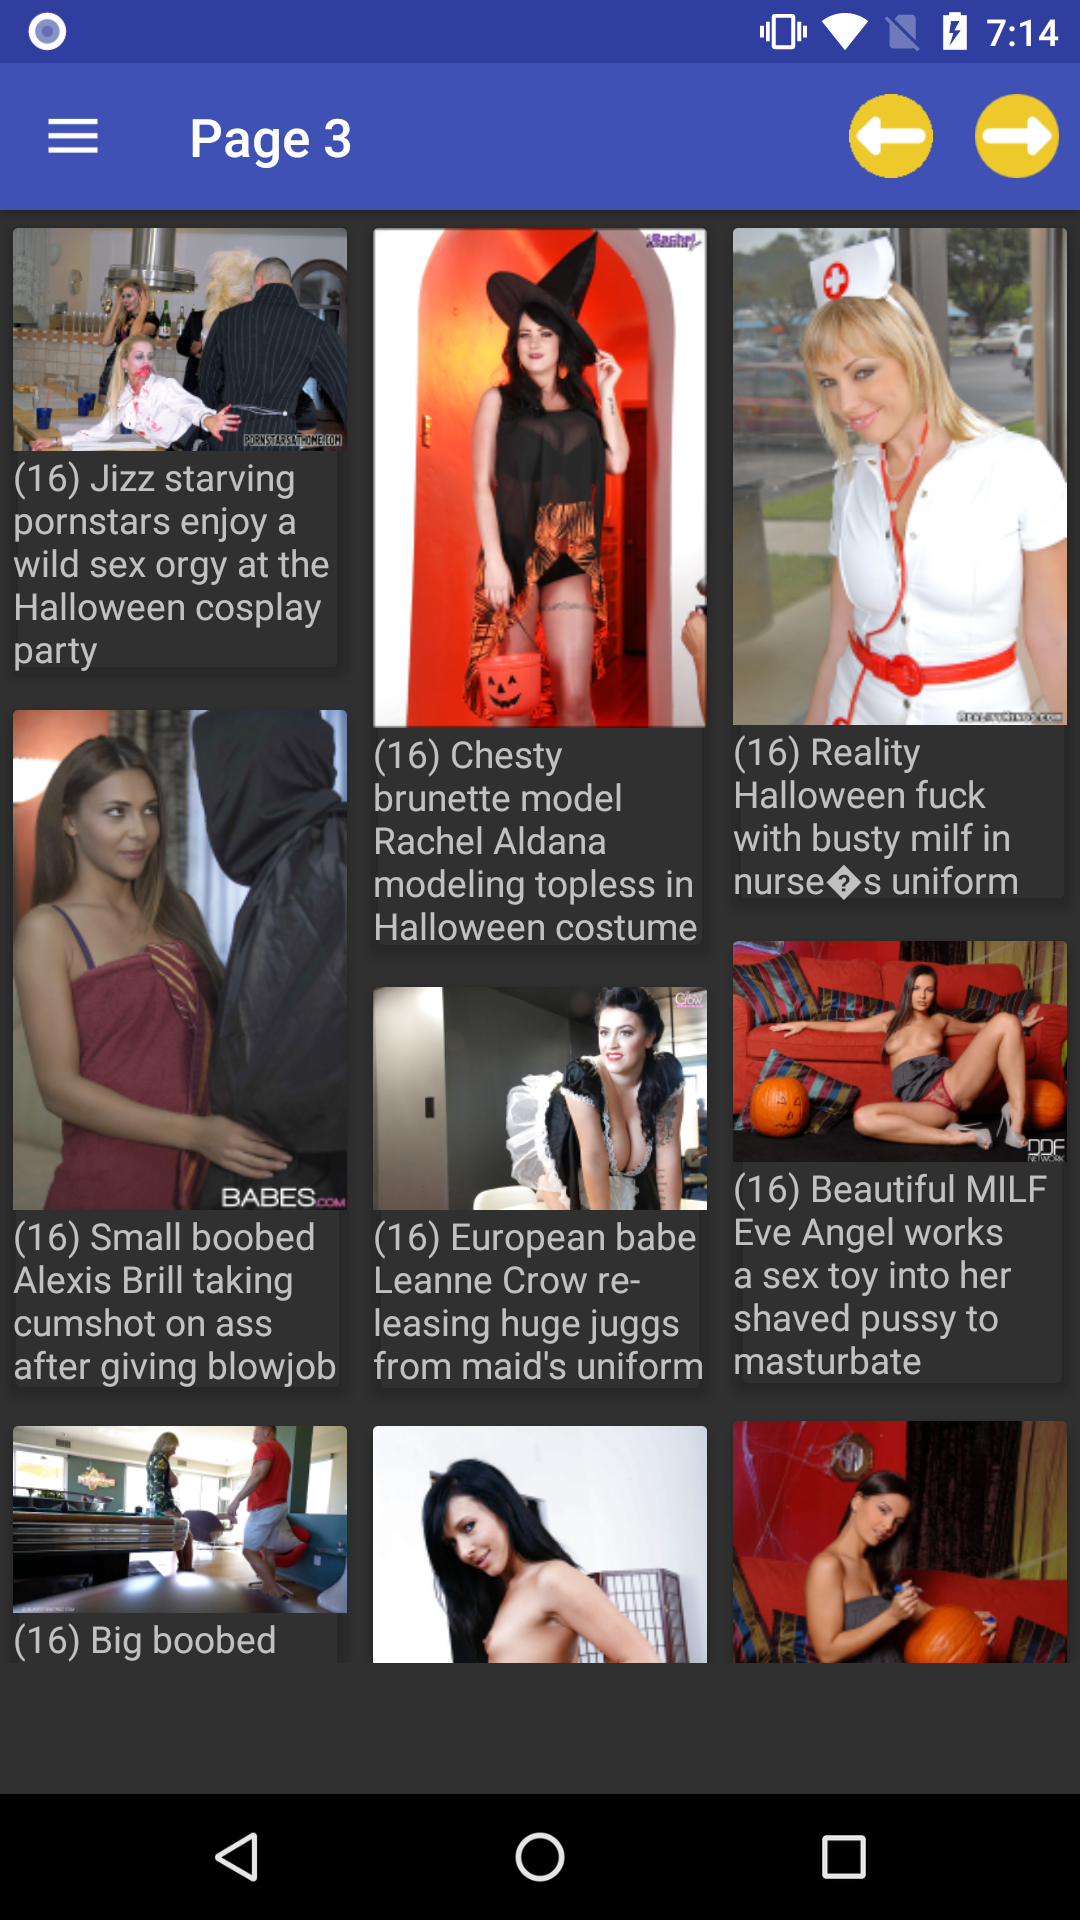 Halloween sexy galleries pornstar,daily,stacy,hentai,image,porn,apps,galleries,wallpaper,backgrounds,sexy,cosplay,pictires,images,adult,rated,android,halloween,anime,adams,for,pornstars,amateur,erotic,collections,titty,picture